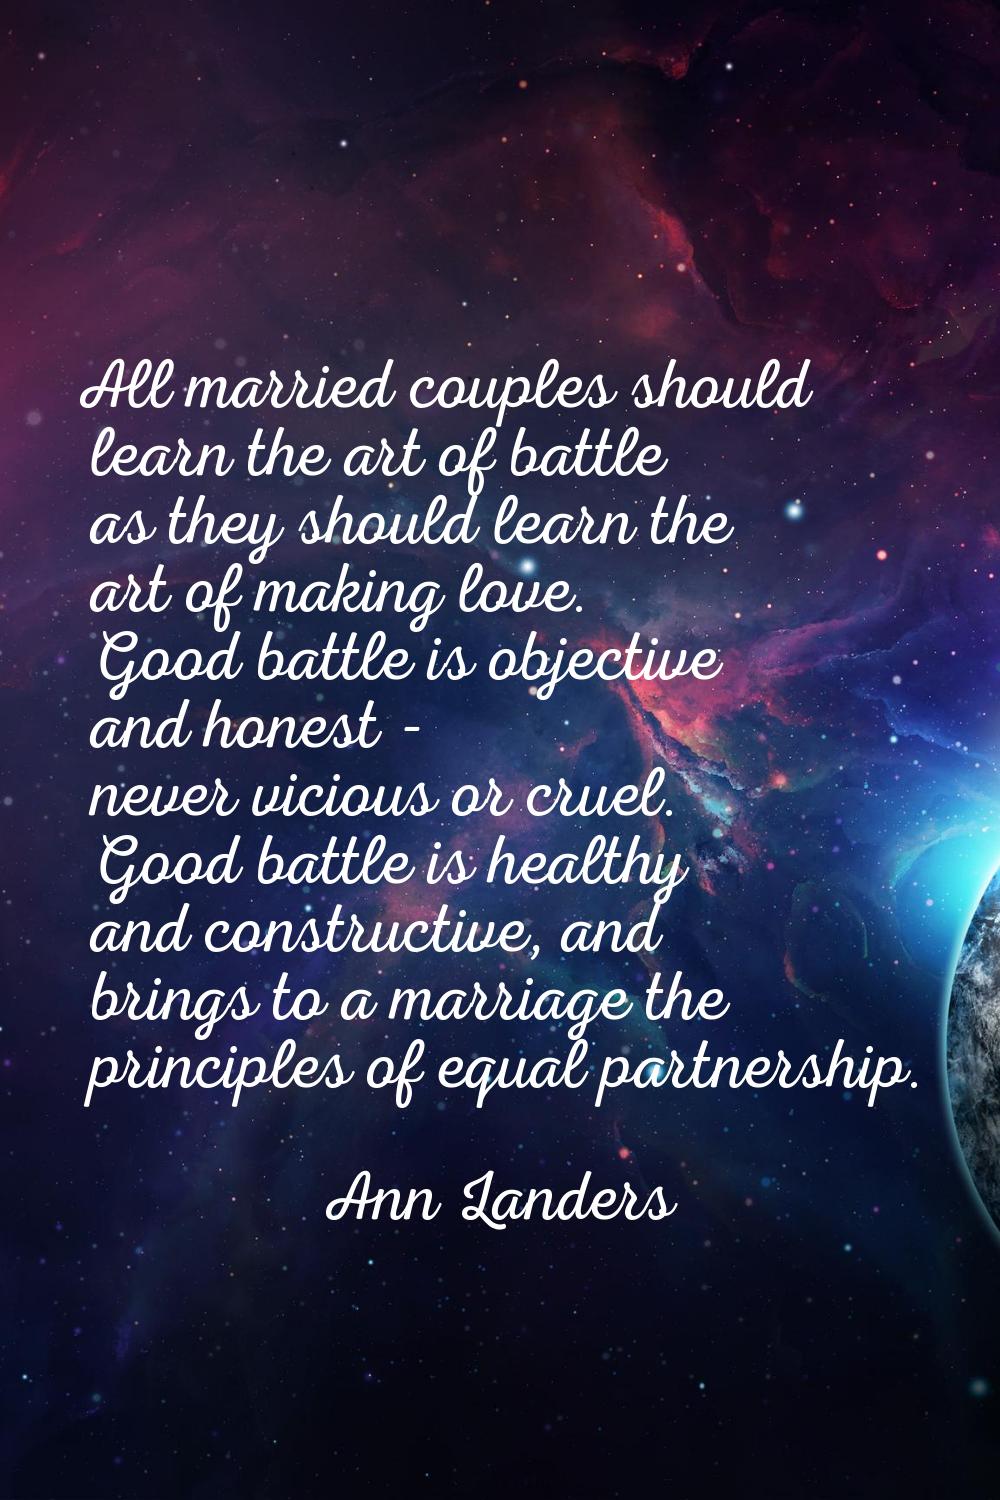 All married couples should learn the art of battle as they should learn the art of making love. Goo